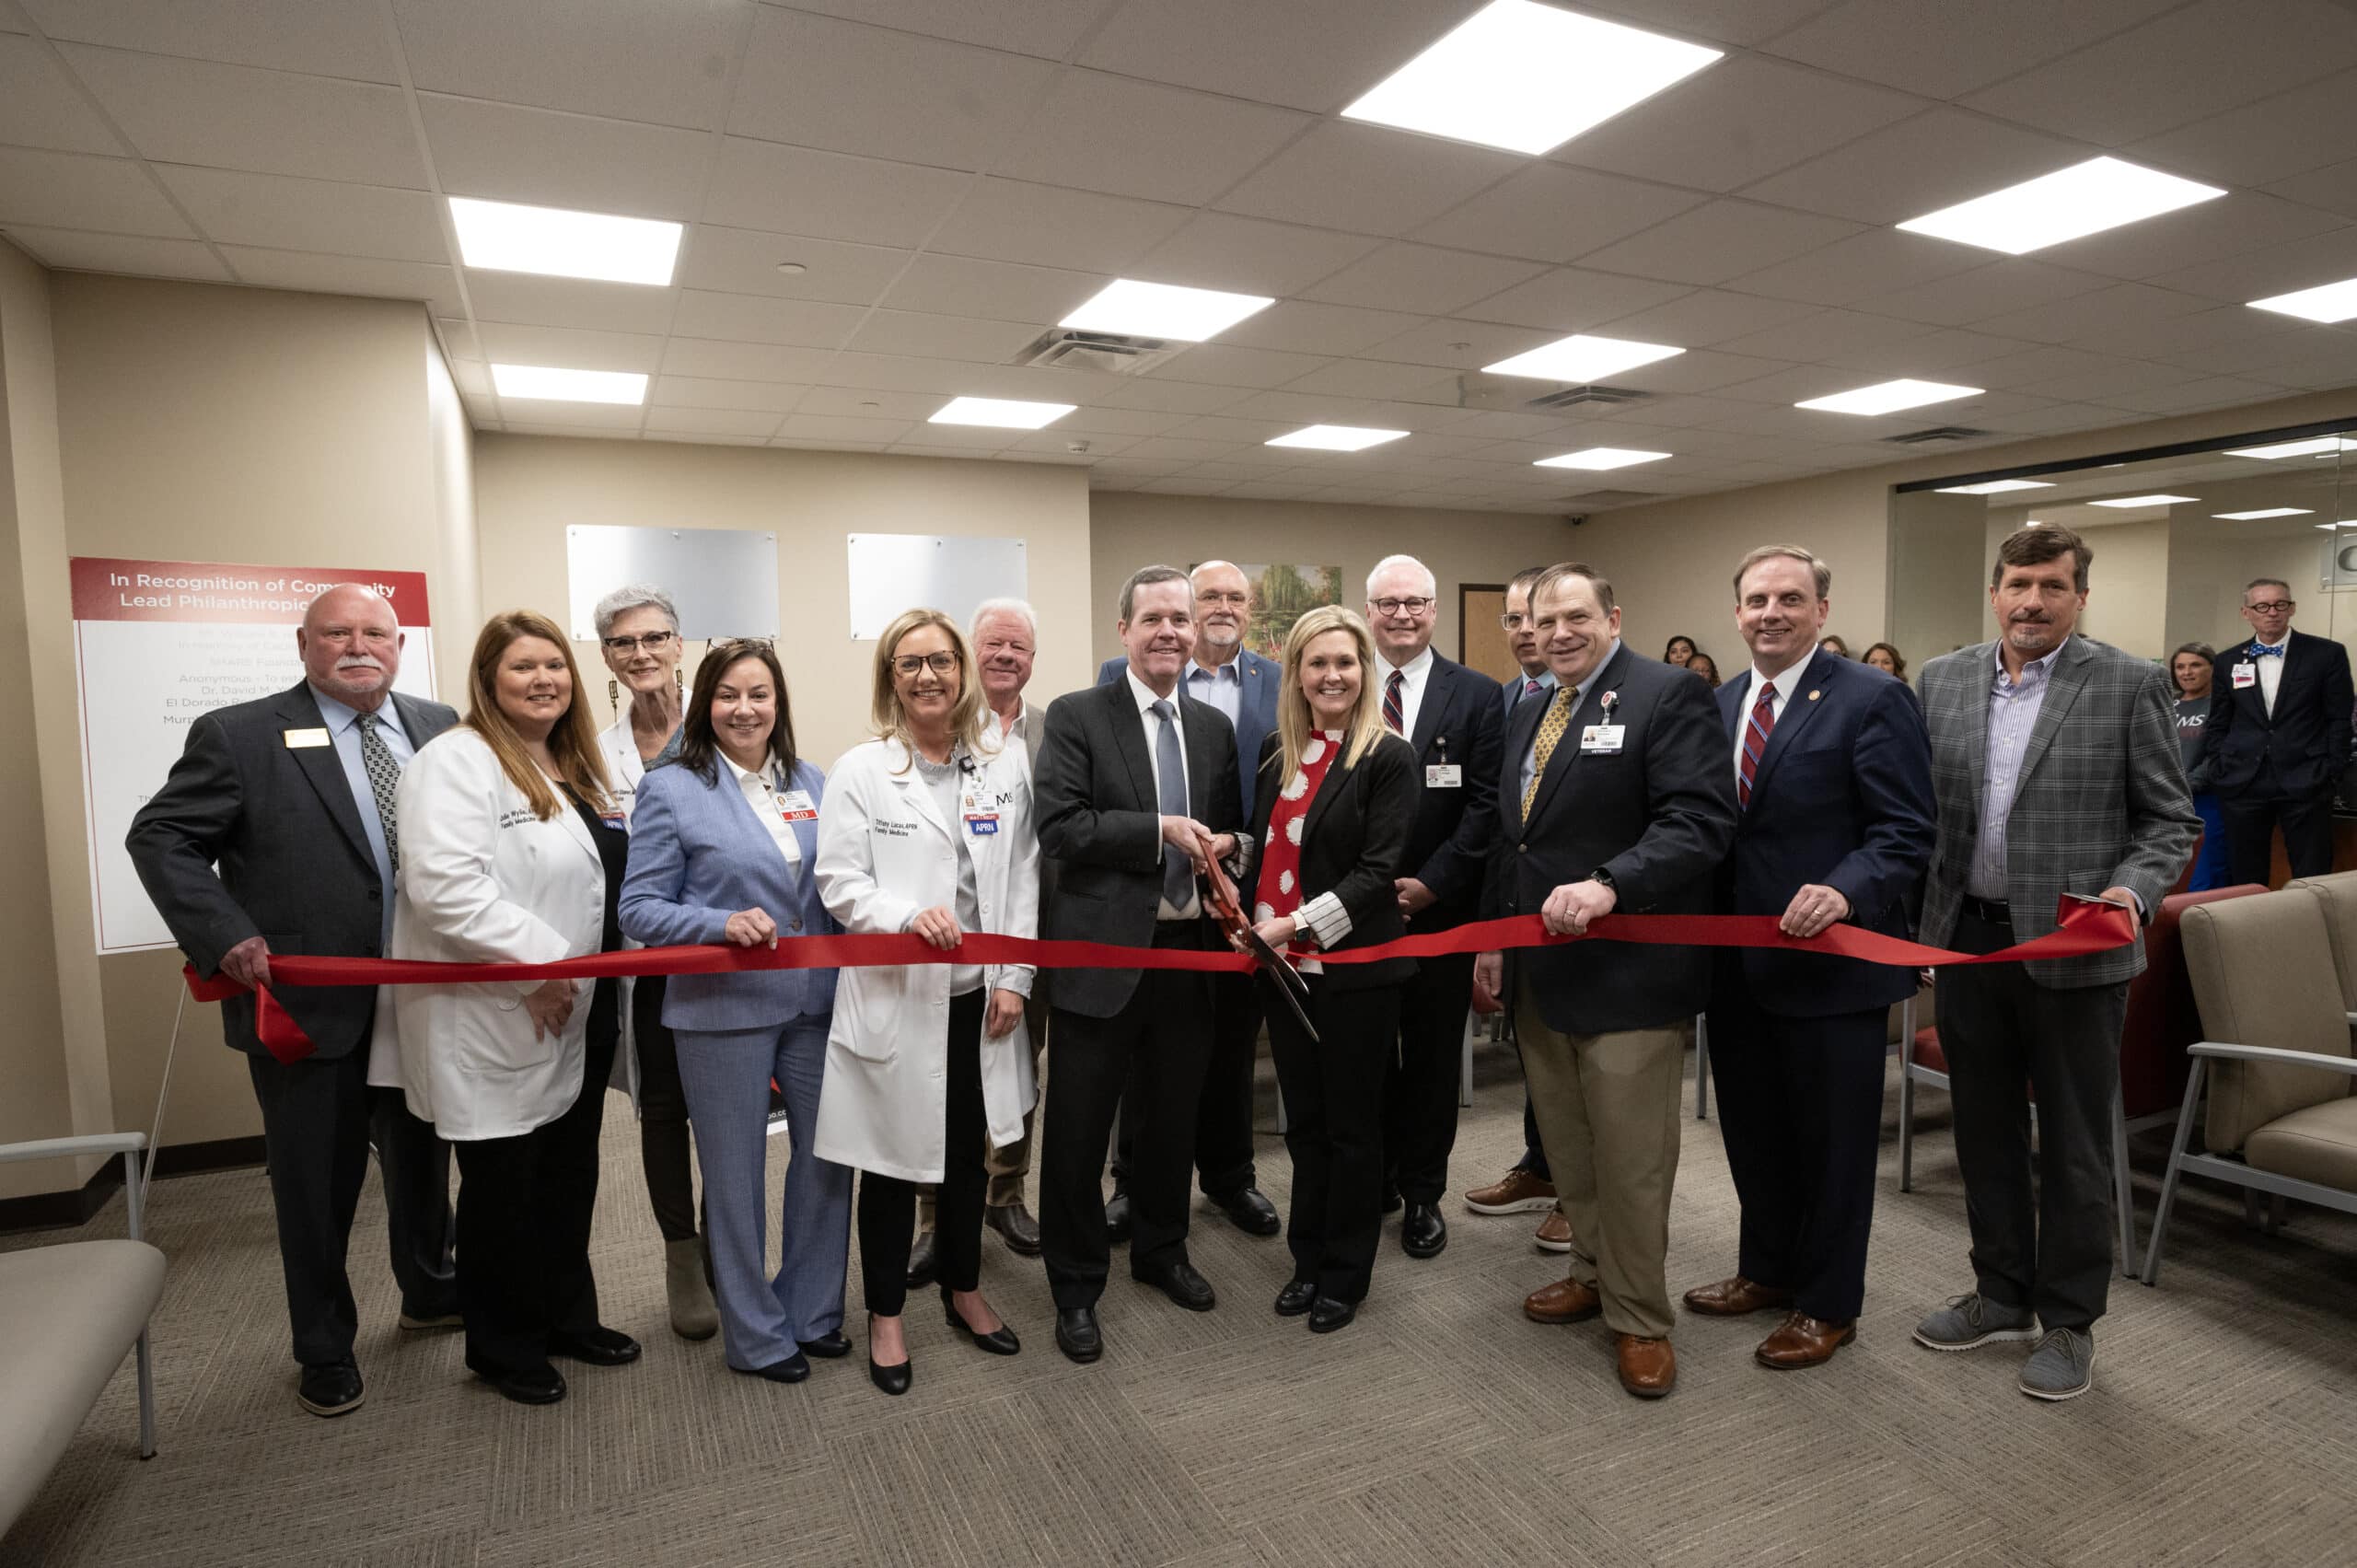 Cam Patterson, chancellor of UAMS and CEO of UAMS Health, and Danna Taylor, president of South Arkansas Regional Hospital, cut the ribbon at the new UAMS Health Family Medical Center in El Dorado.